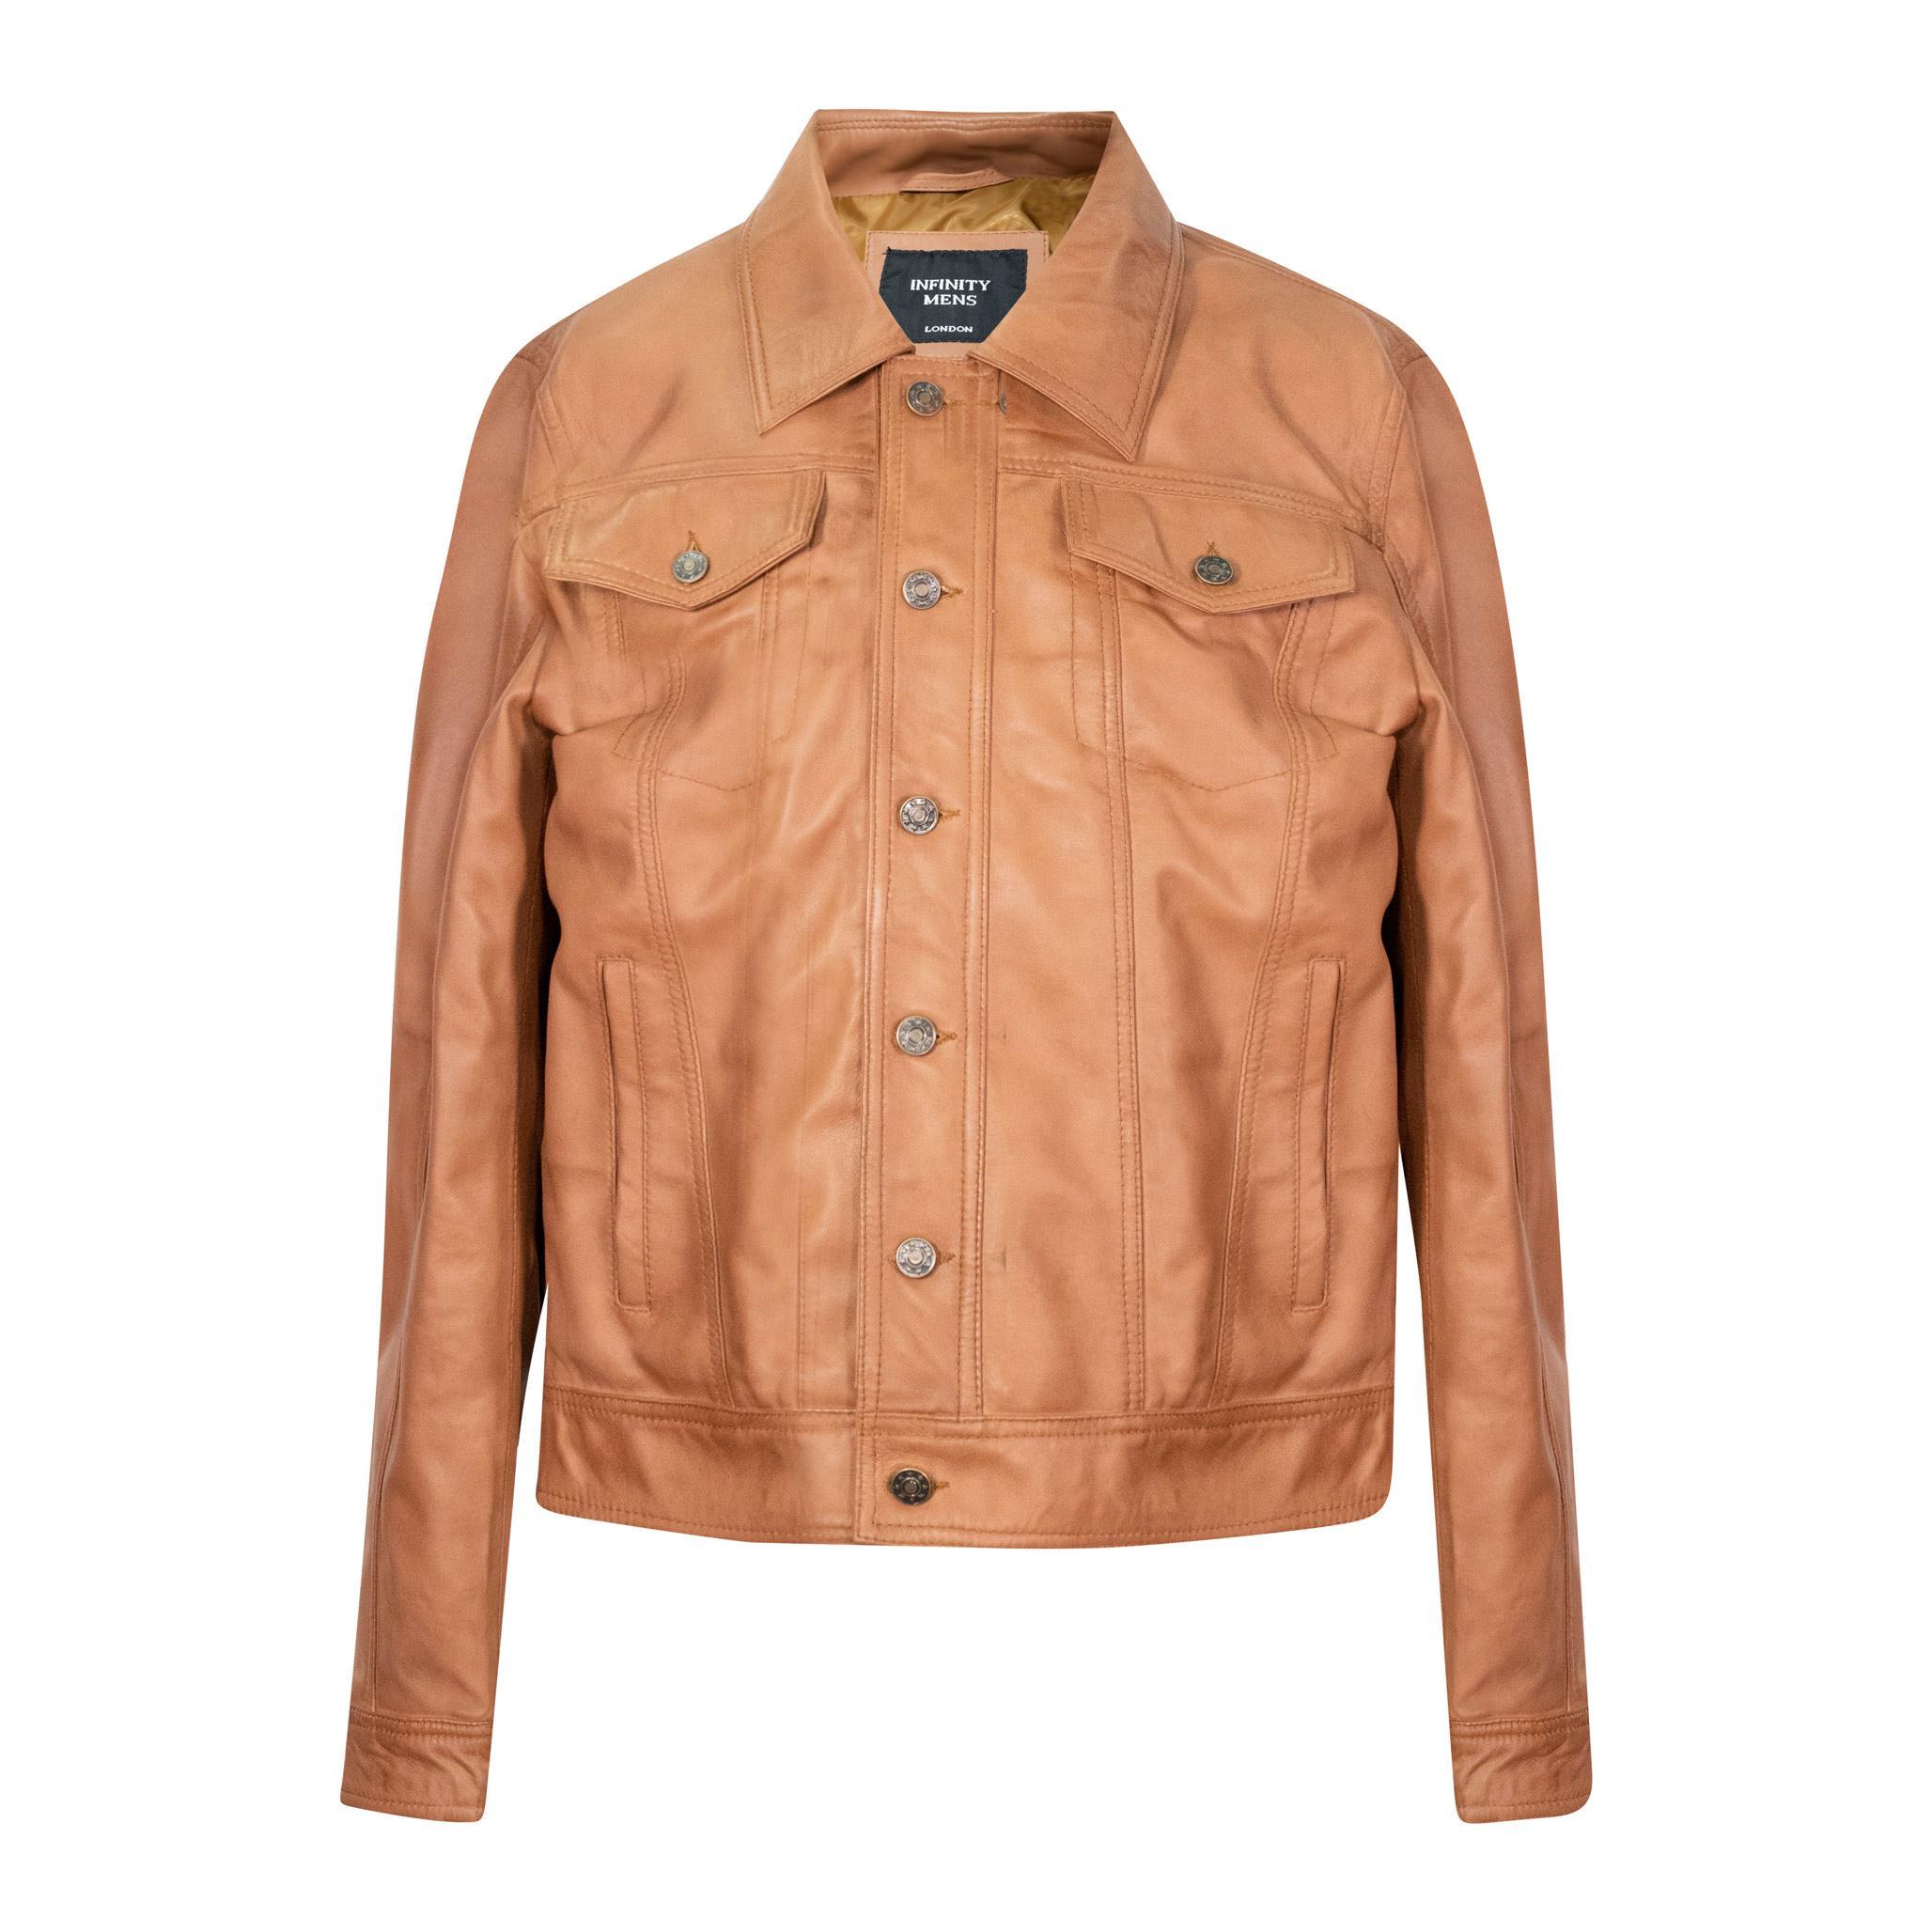 A fitted leather jacket in tan, with buttoned fastening and buttoned chest pockets. Simple side pockets.